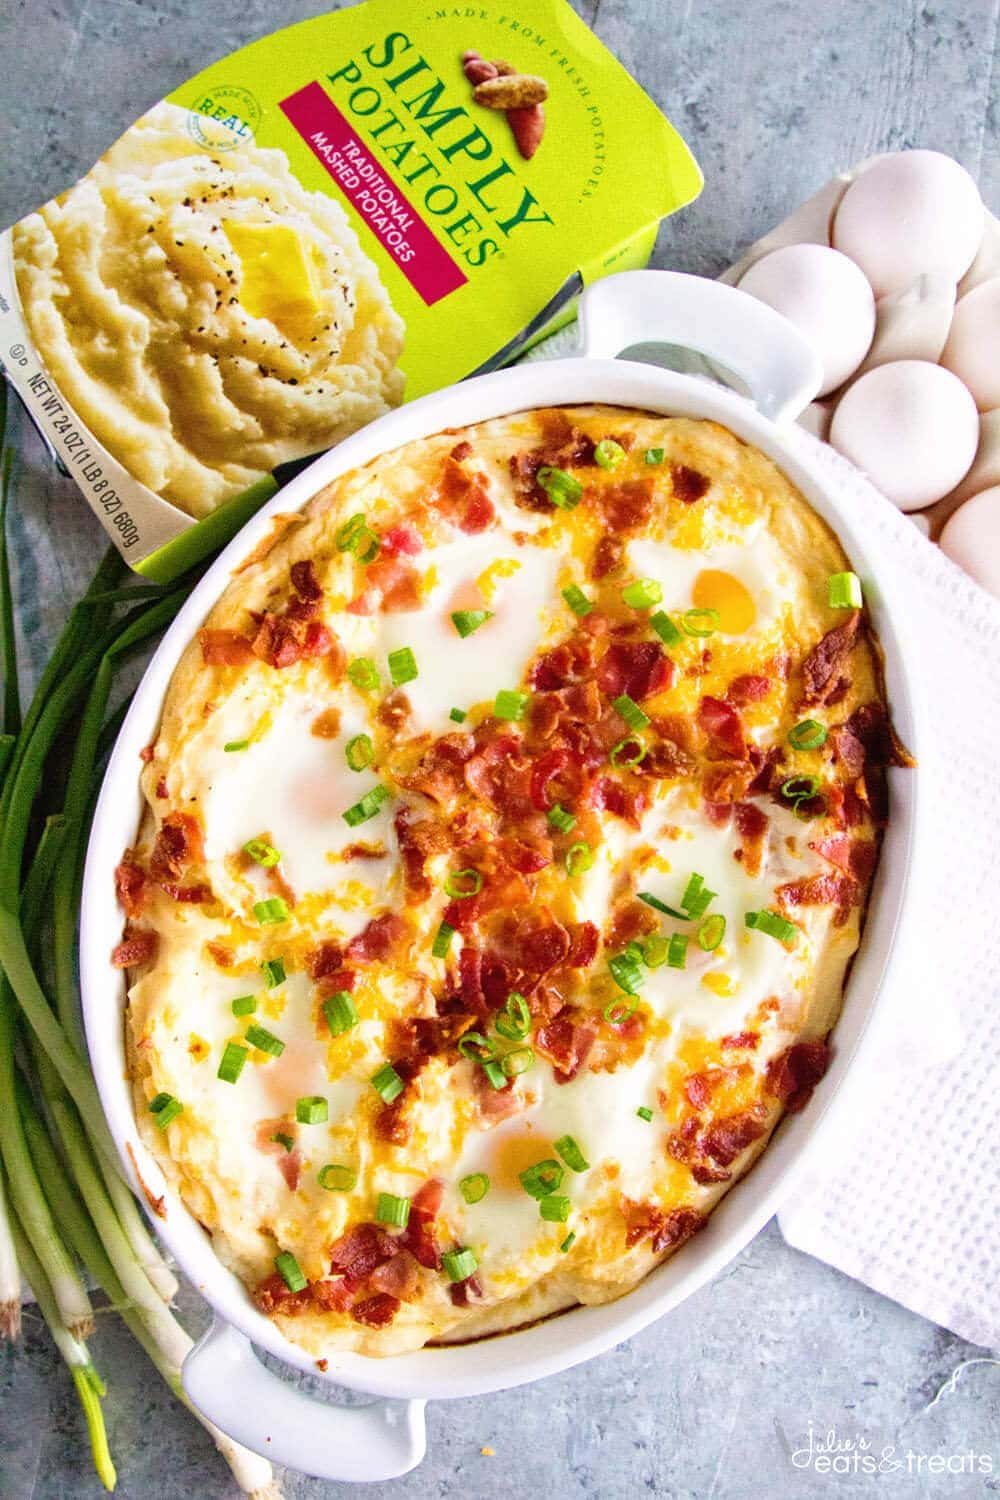 Cheesy Mashed Potato Egg Casserole ~ Perfect Breakfast or Brunch Casserole Loaded with Mashed Potatoes, Eggs, Cheese and Bacon! This Hearty Breakfast Recipe is Perfect for Entertaining!